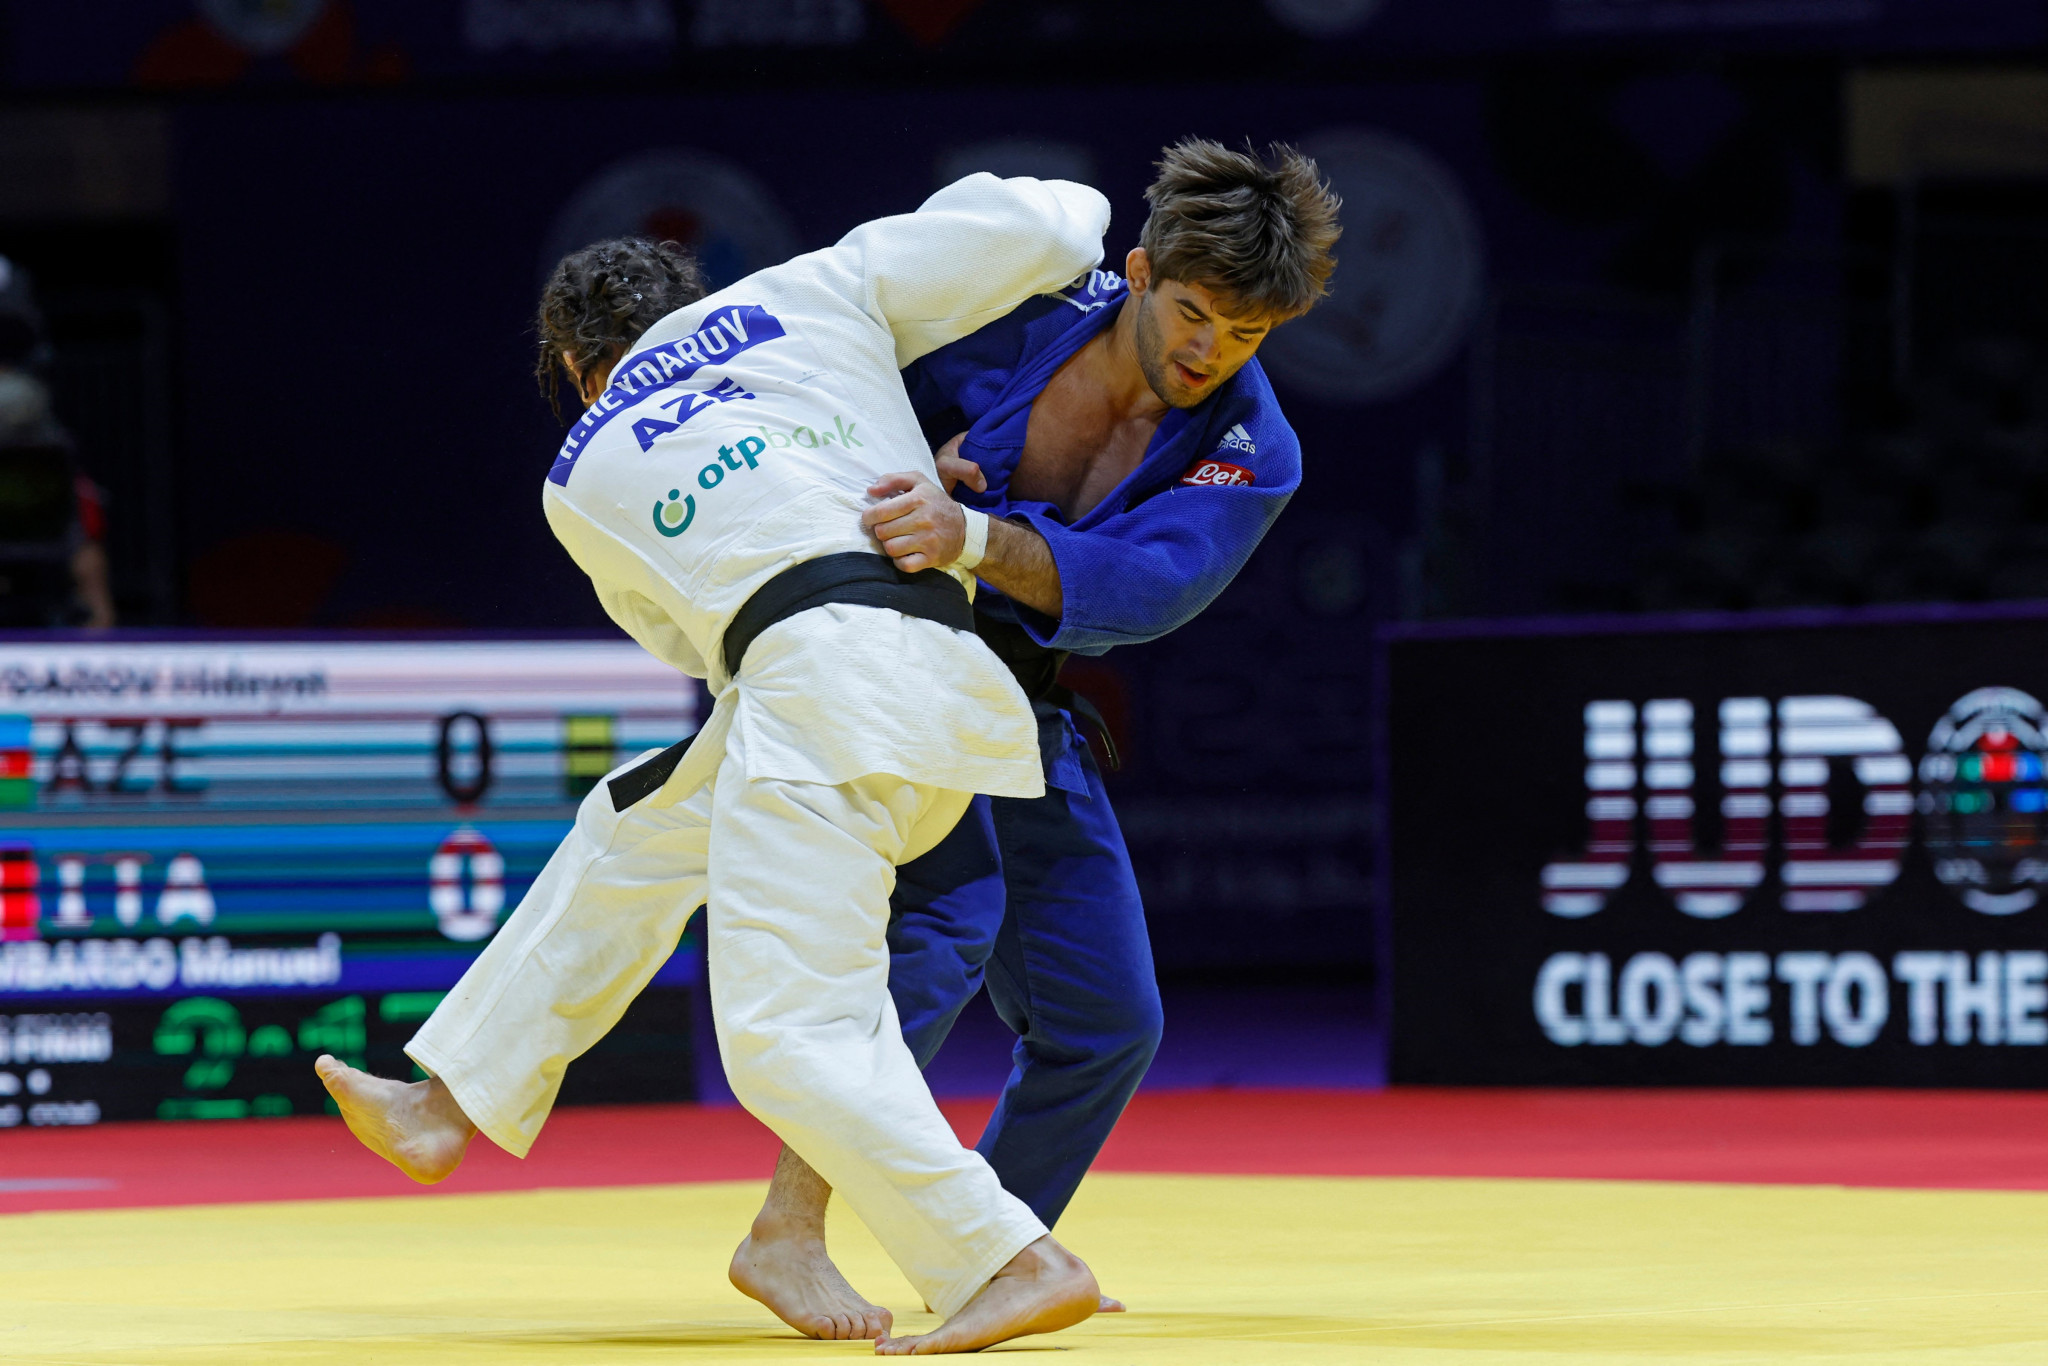 insidethegames is reporting LIVE from the World Judo Championships